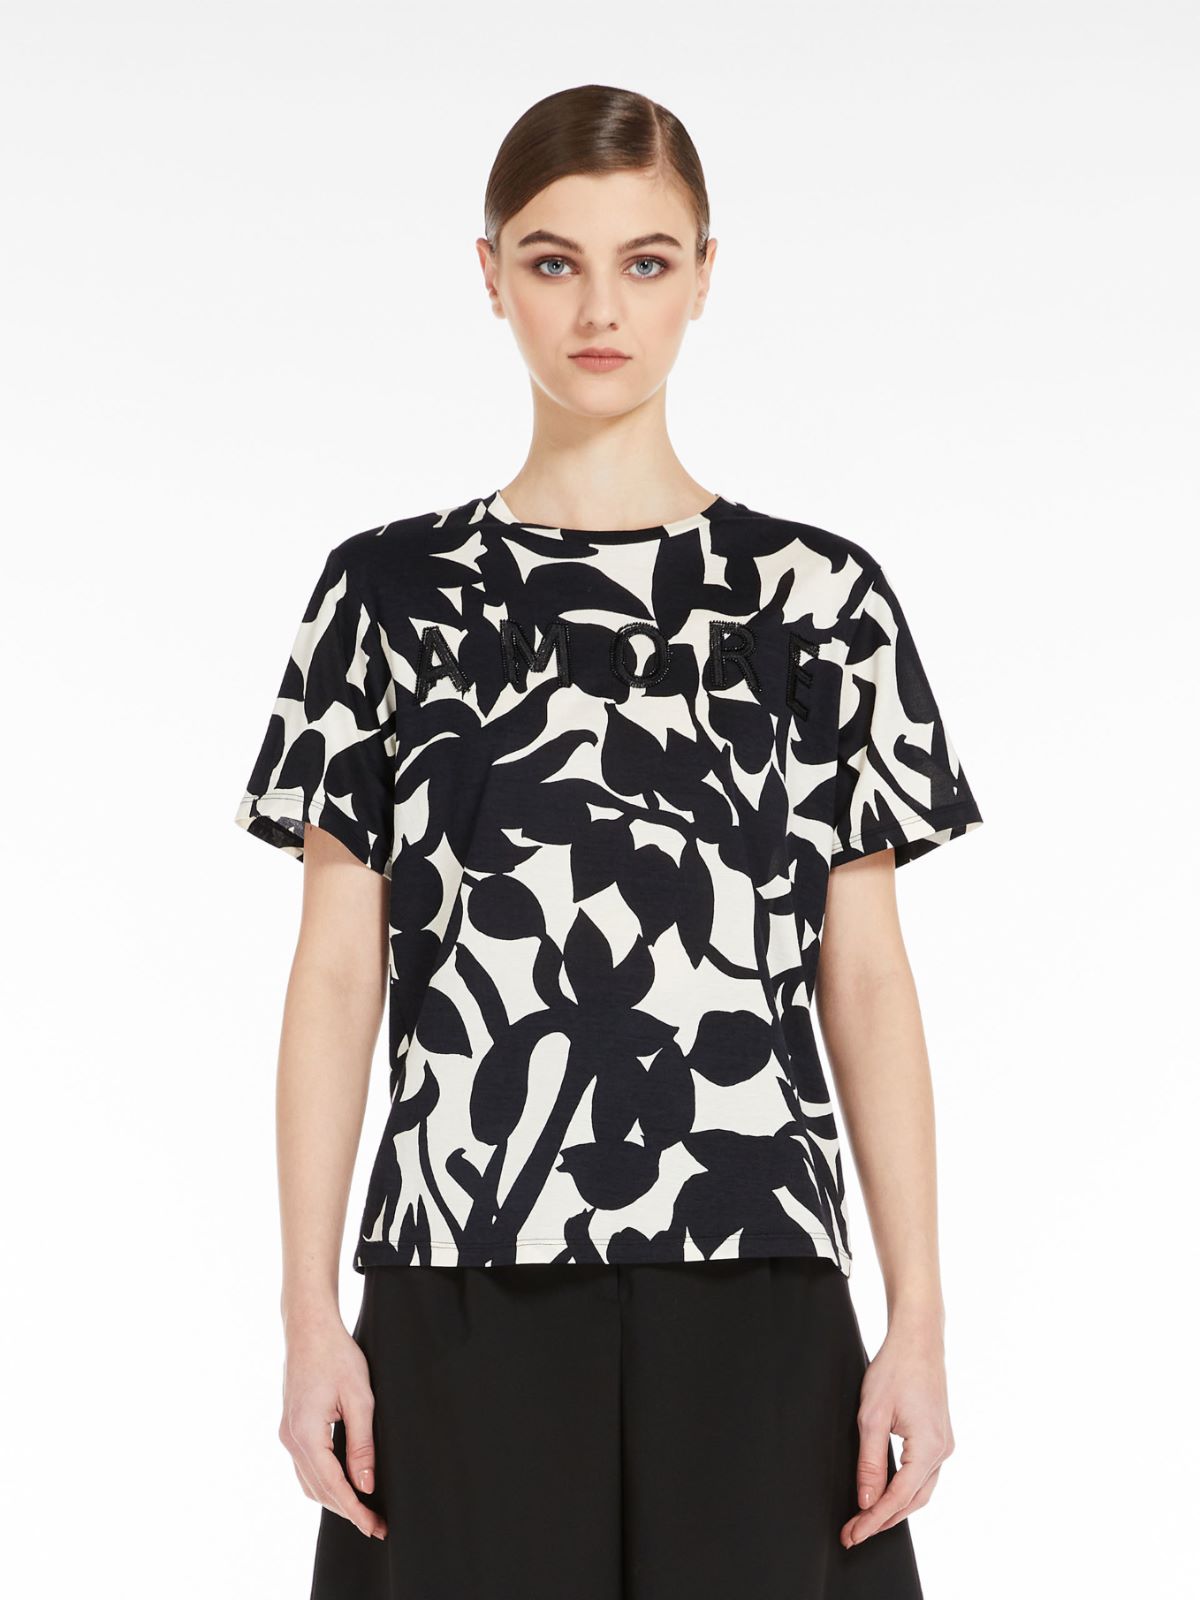 Embroidered jersey T-shirt, black | Weekend Max Mara